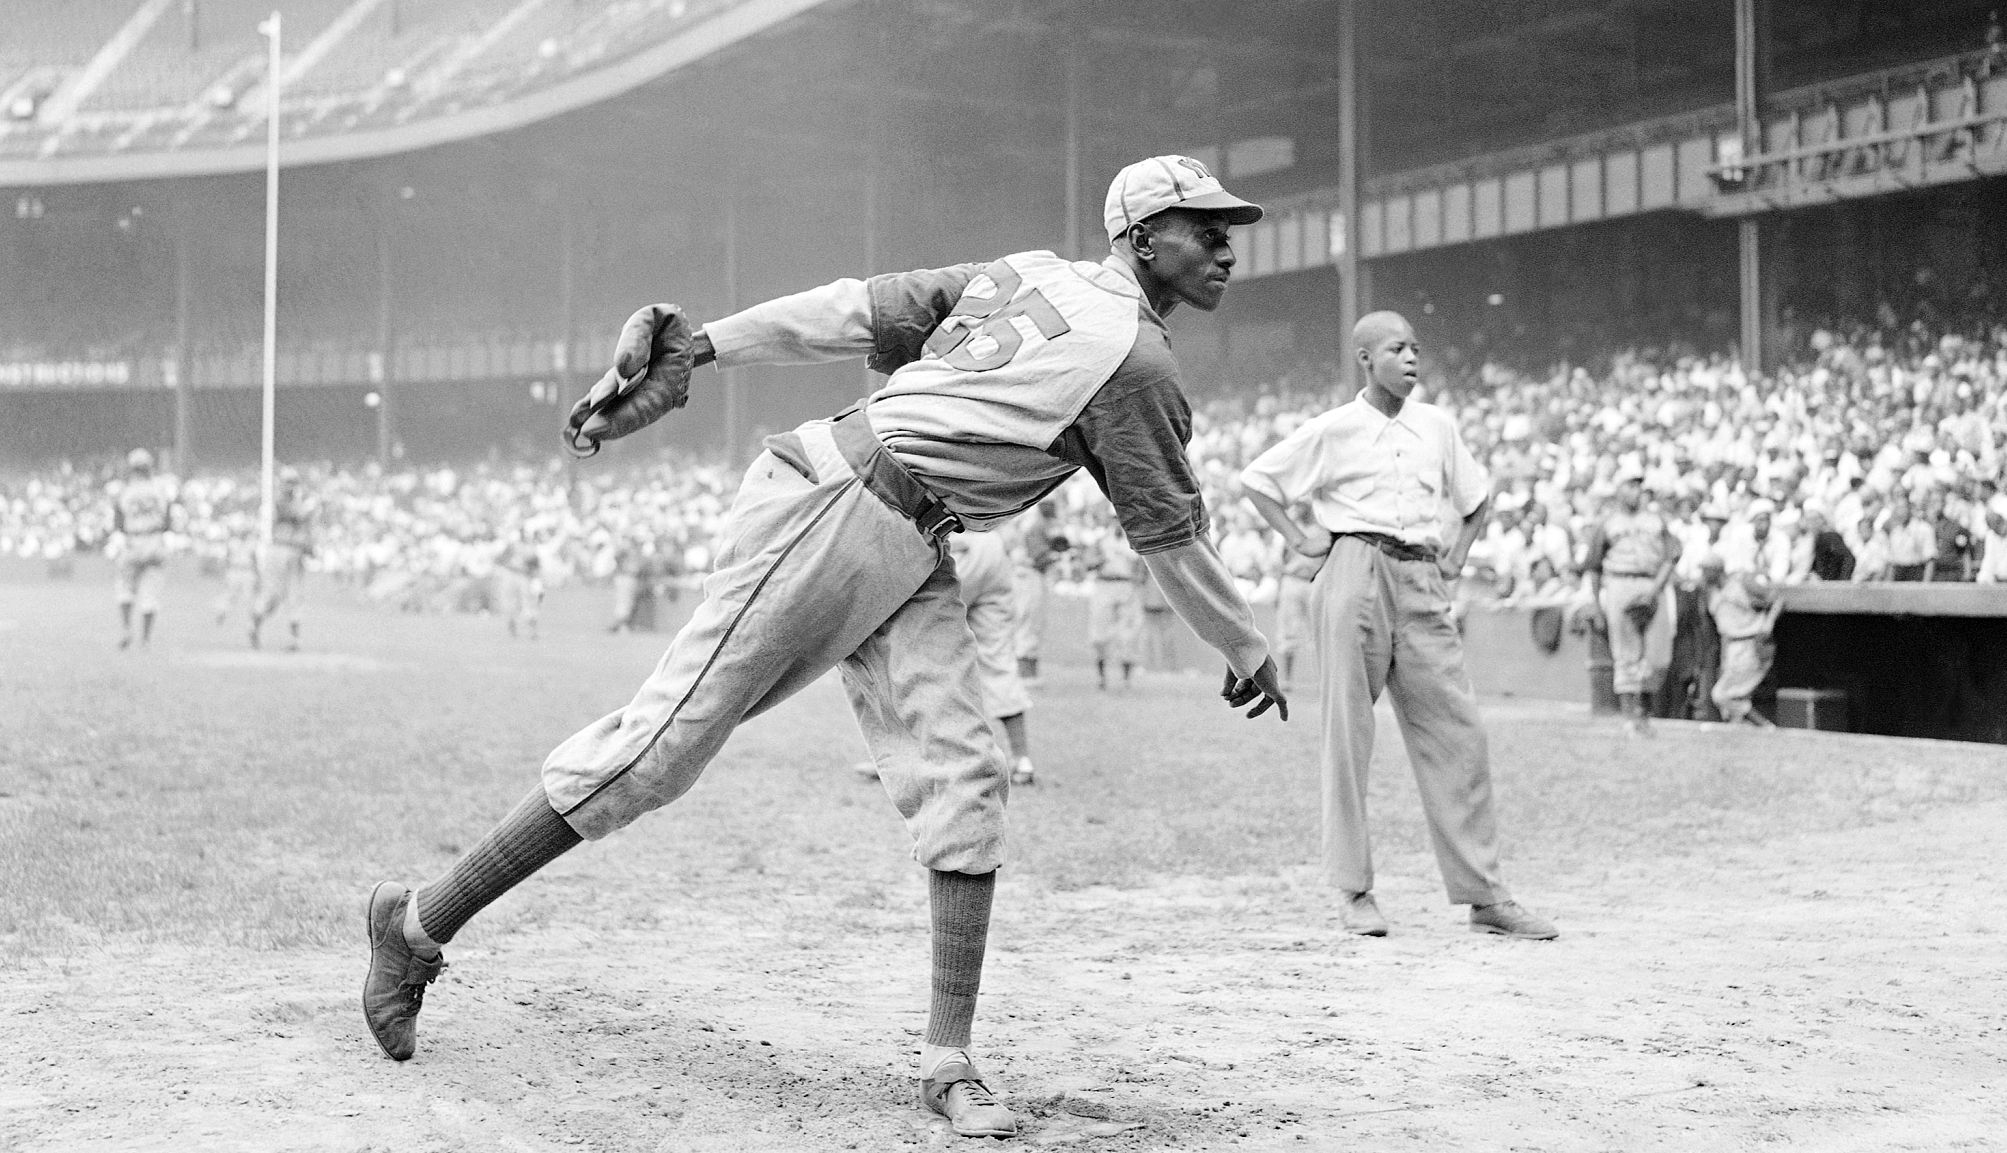 satchel paige warns up for a game in nineteen fourty two.